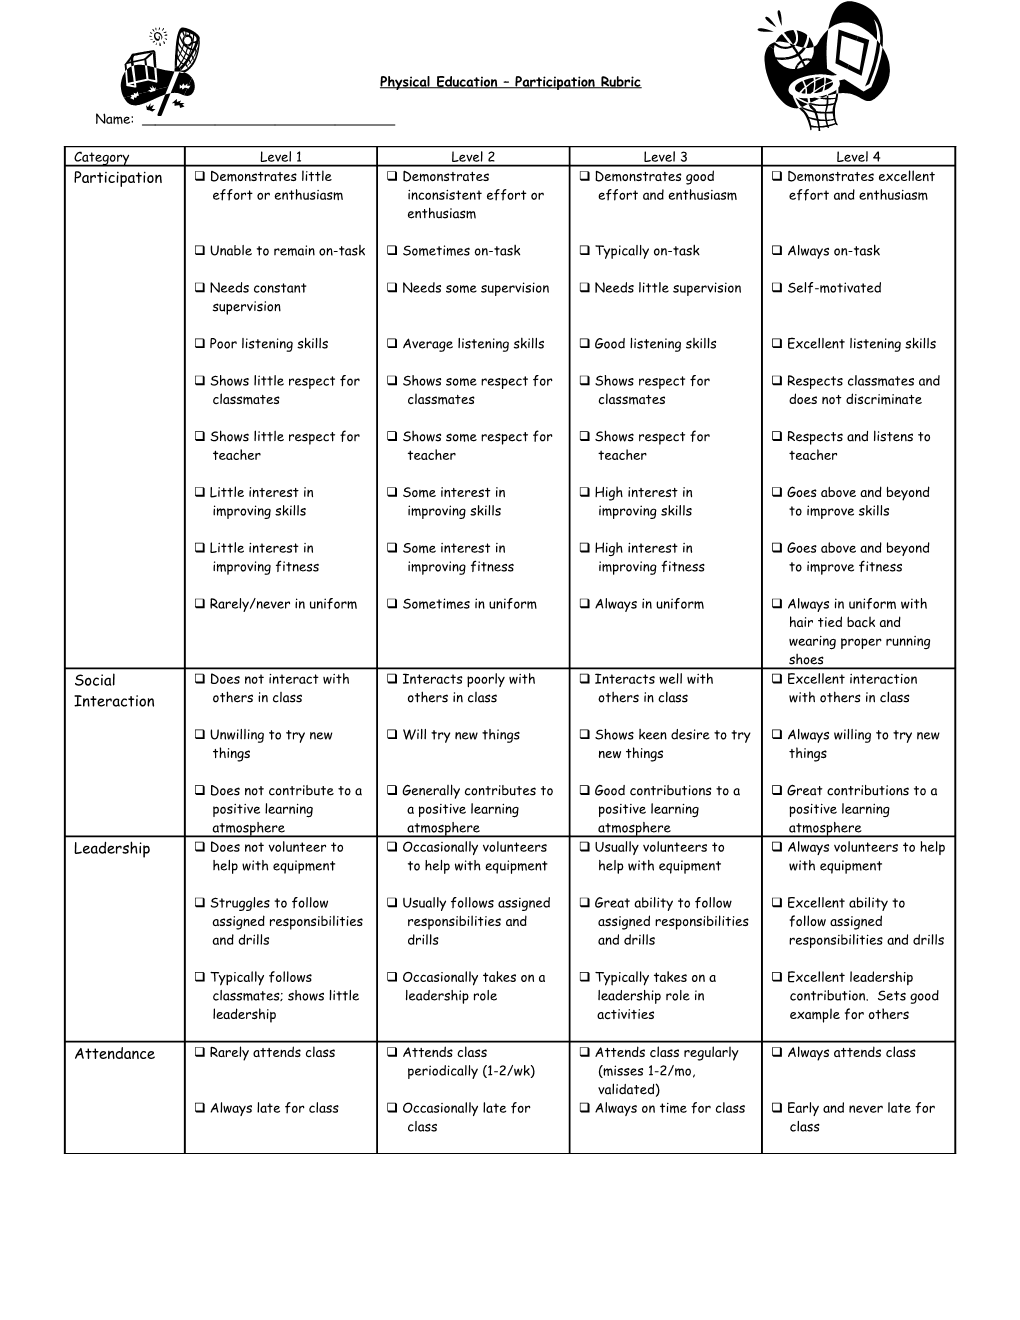 Physical Education Participation Rubric